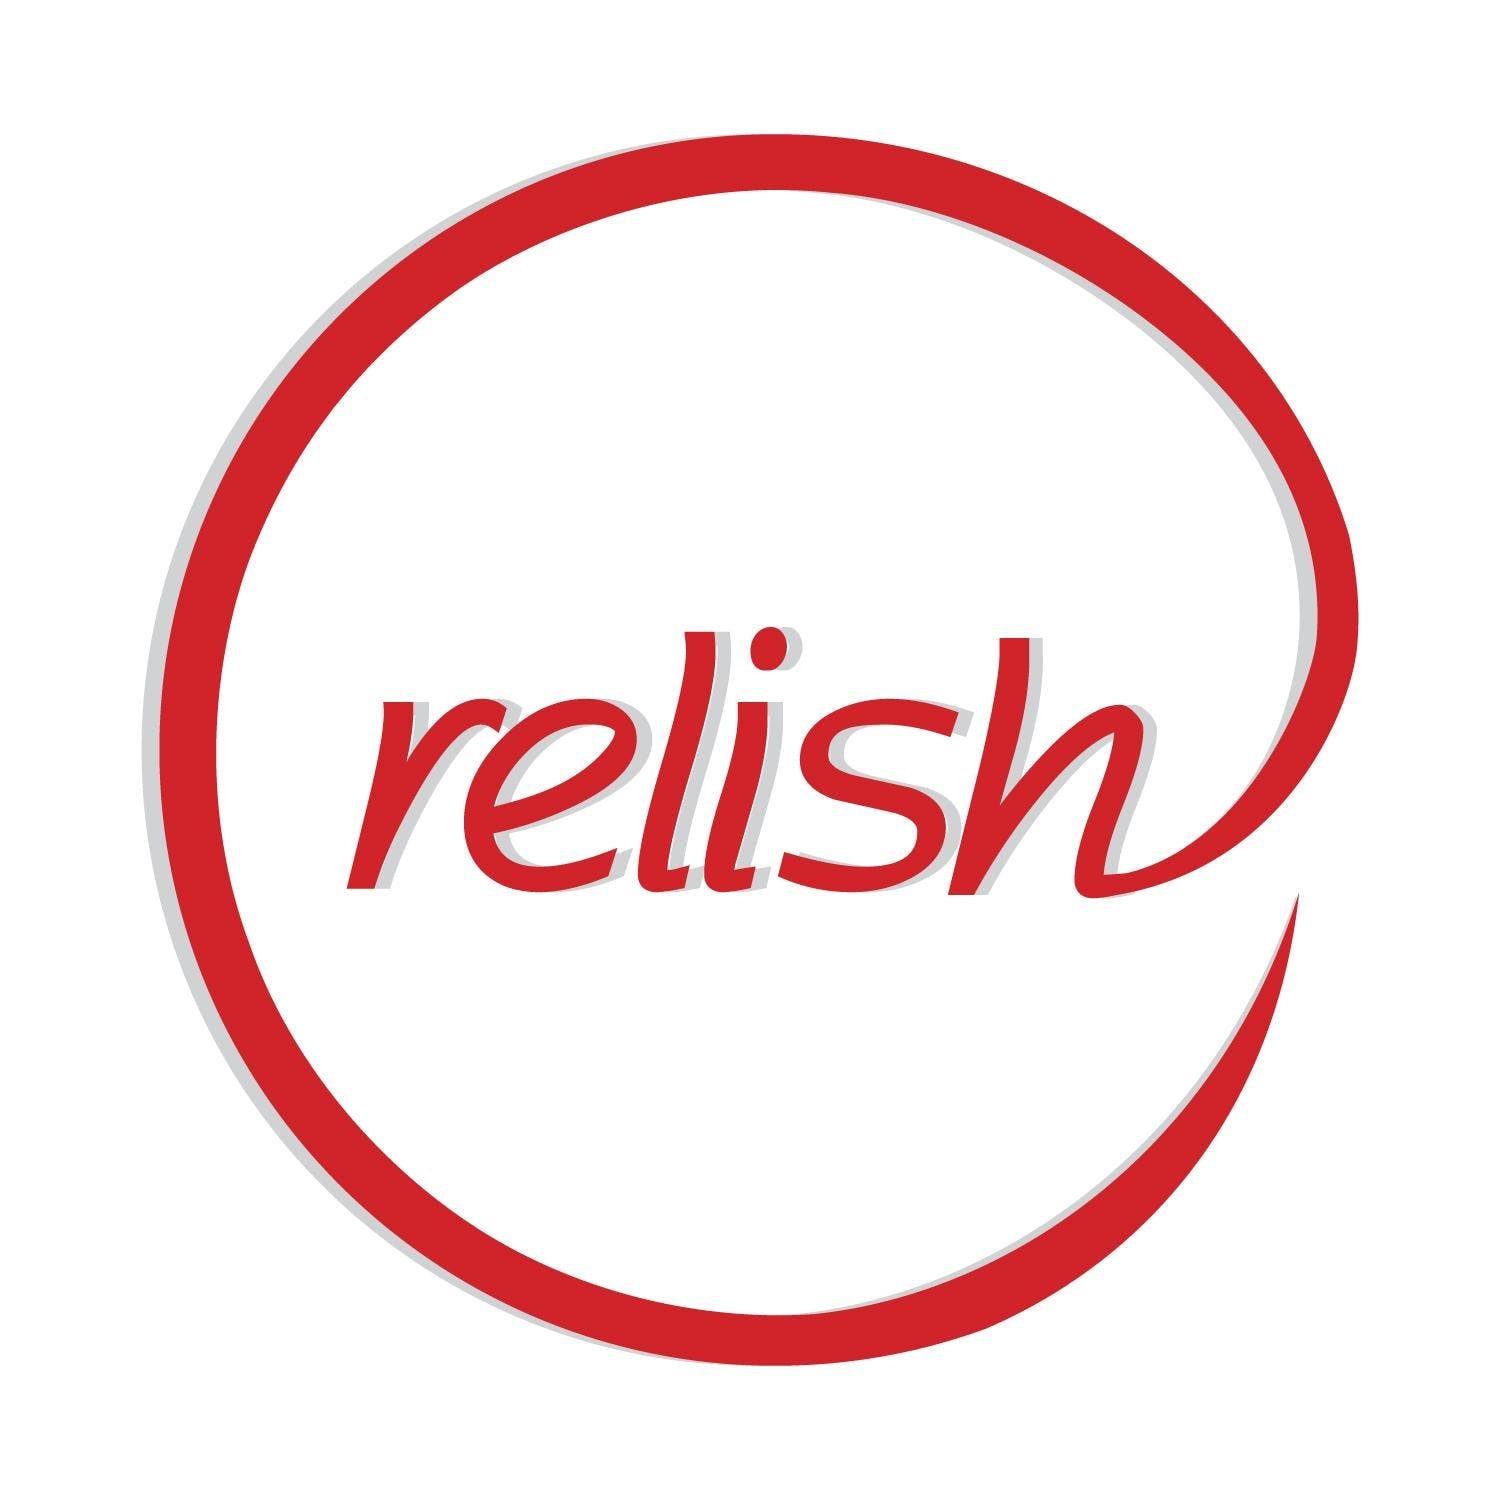 Who Do You Relish? Speed Los Angeles Dating | Relish Singles | LA